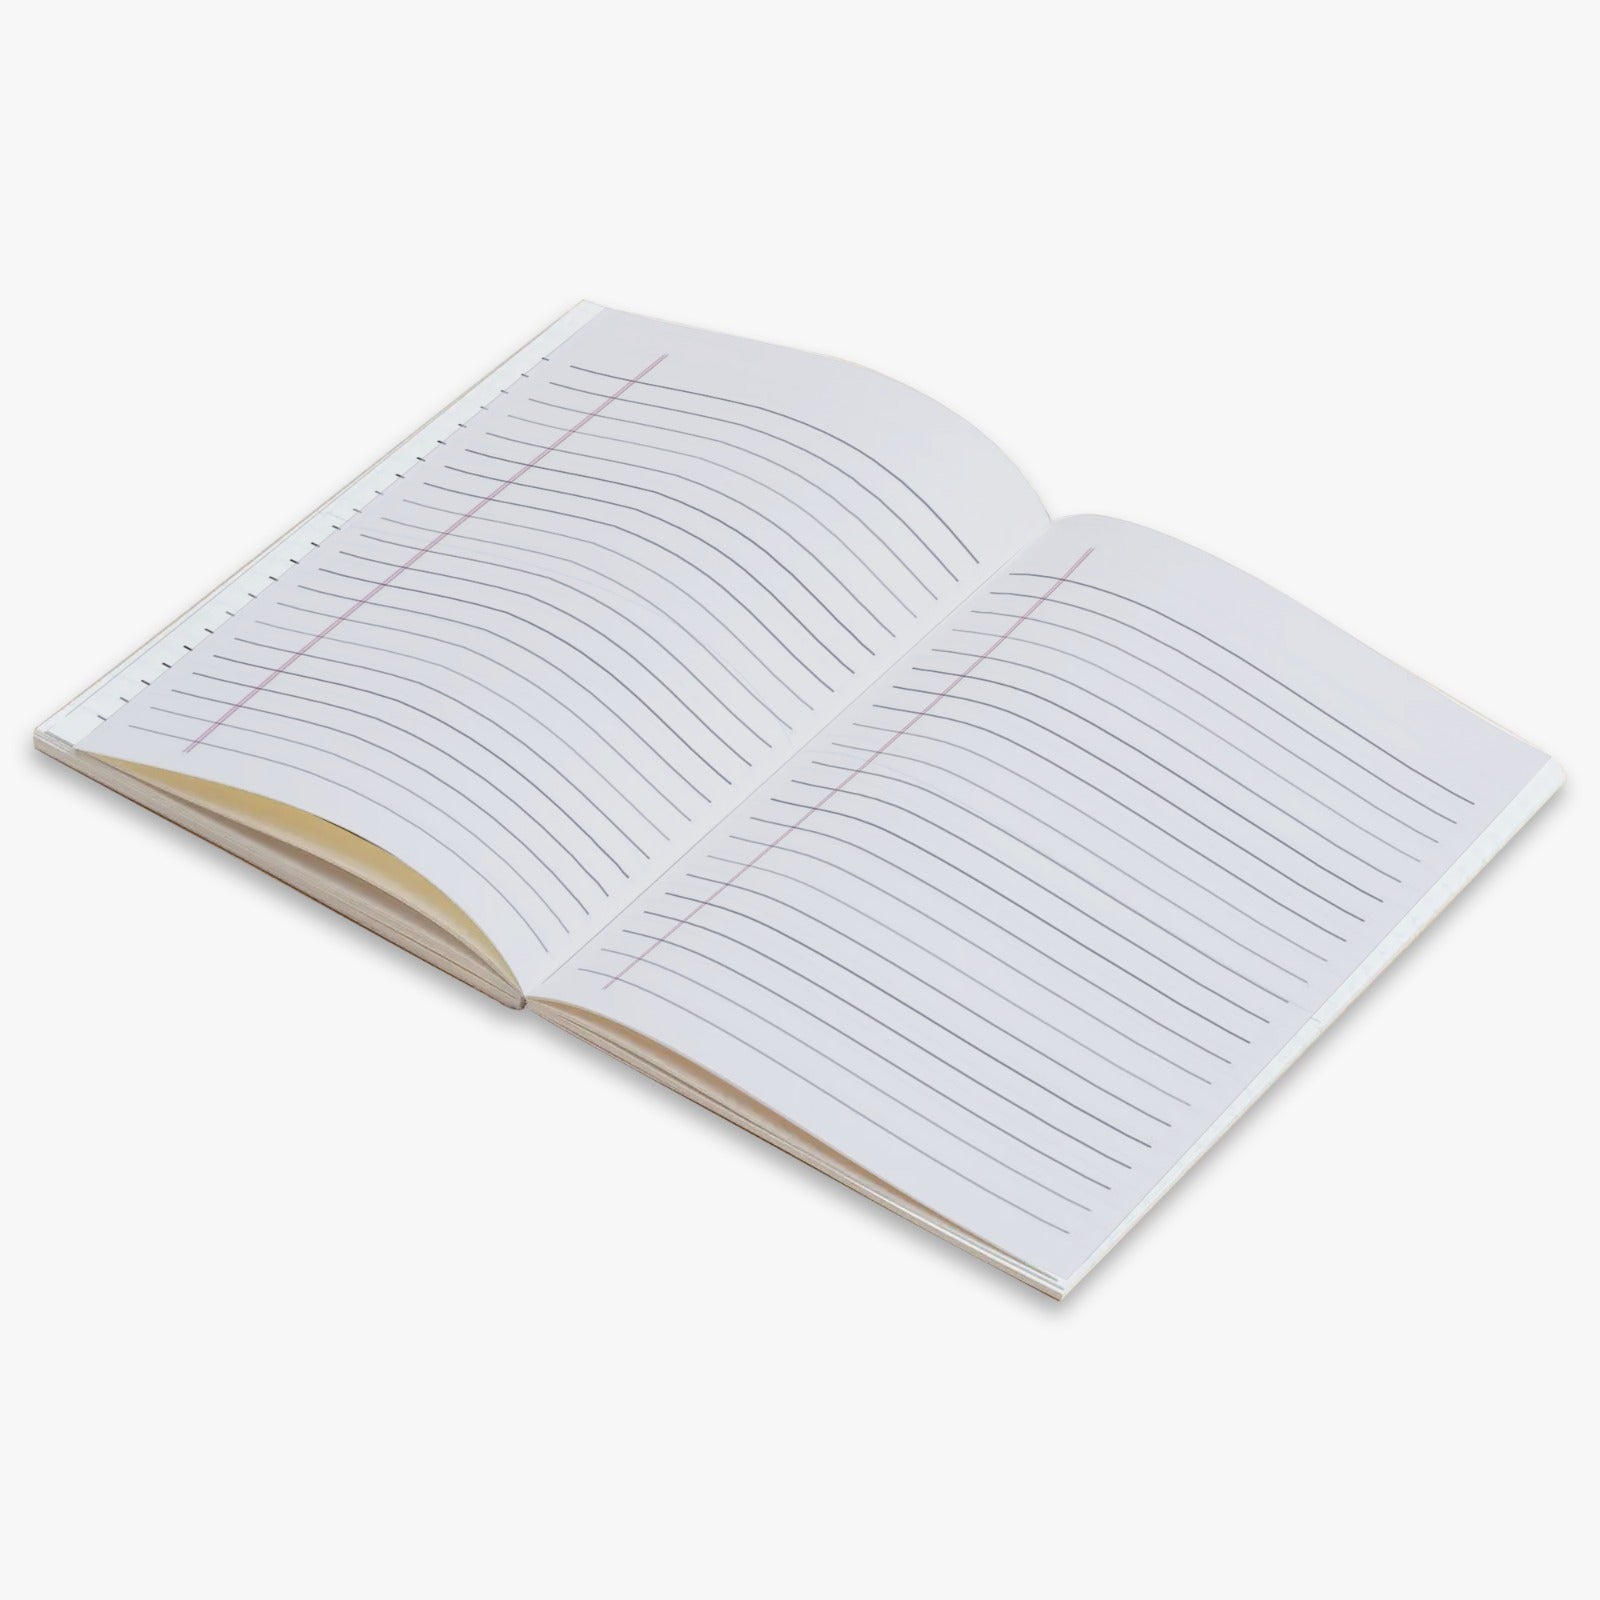 My Book Of Happy Things Ruled Notebook A5 90Gsm 64Pages